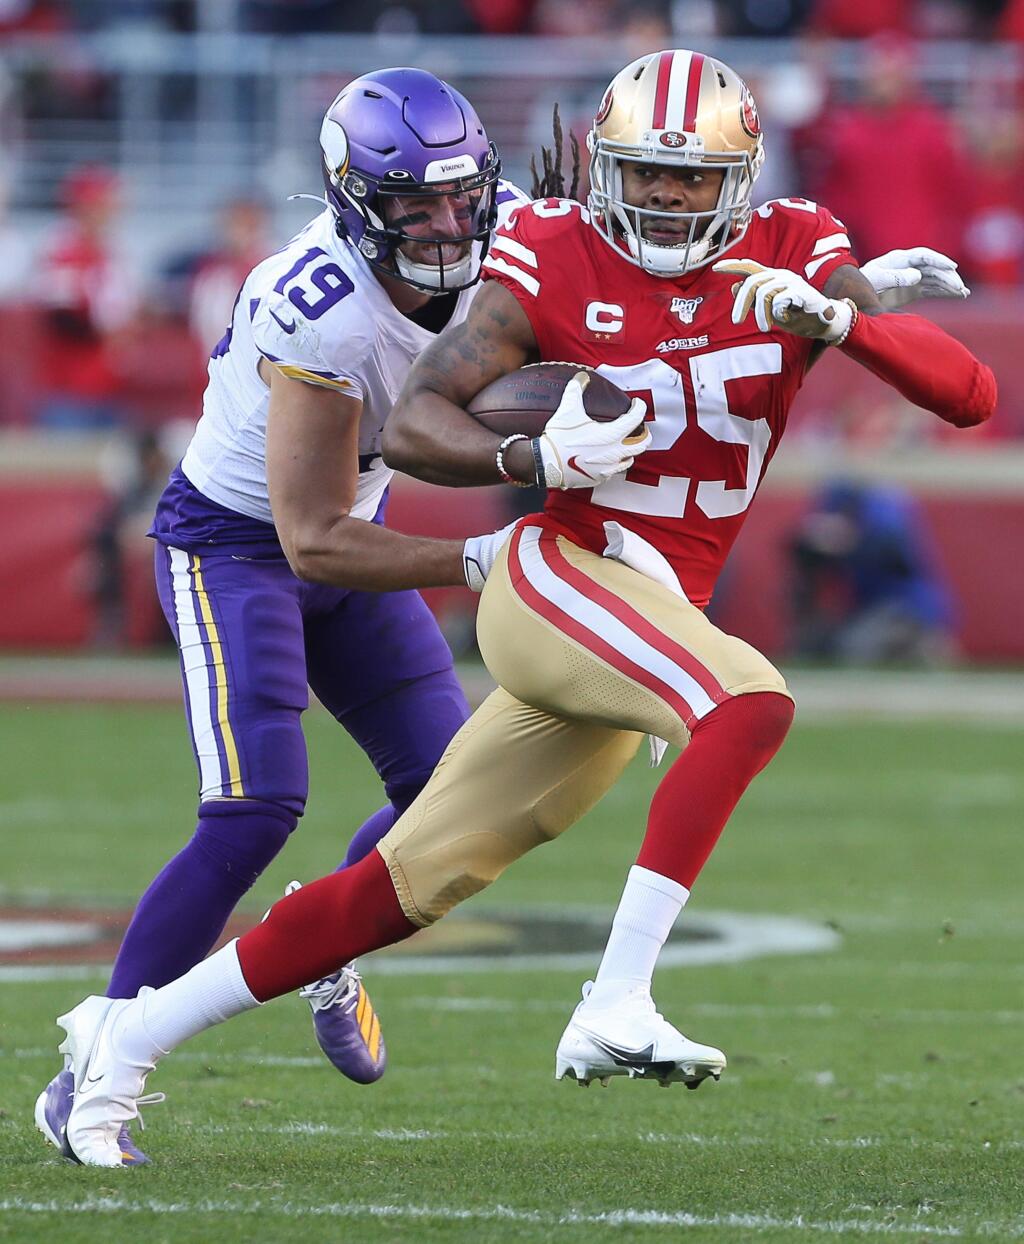 San Francisco 49ers cornerback Richard Sherman runs after intercepting a pass intended for Minnesota Vikings wide receiver Adam Thielen during their NFC divisional playoff game at Levi's Stadium in Santa Clara on Saturday, January 11, 2020. The 49ers defeated the Vikings 27-10.(Christopher Chung/ The Press Democrat)